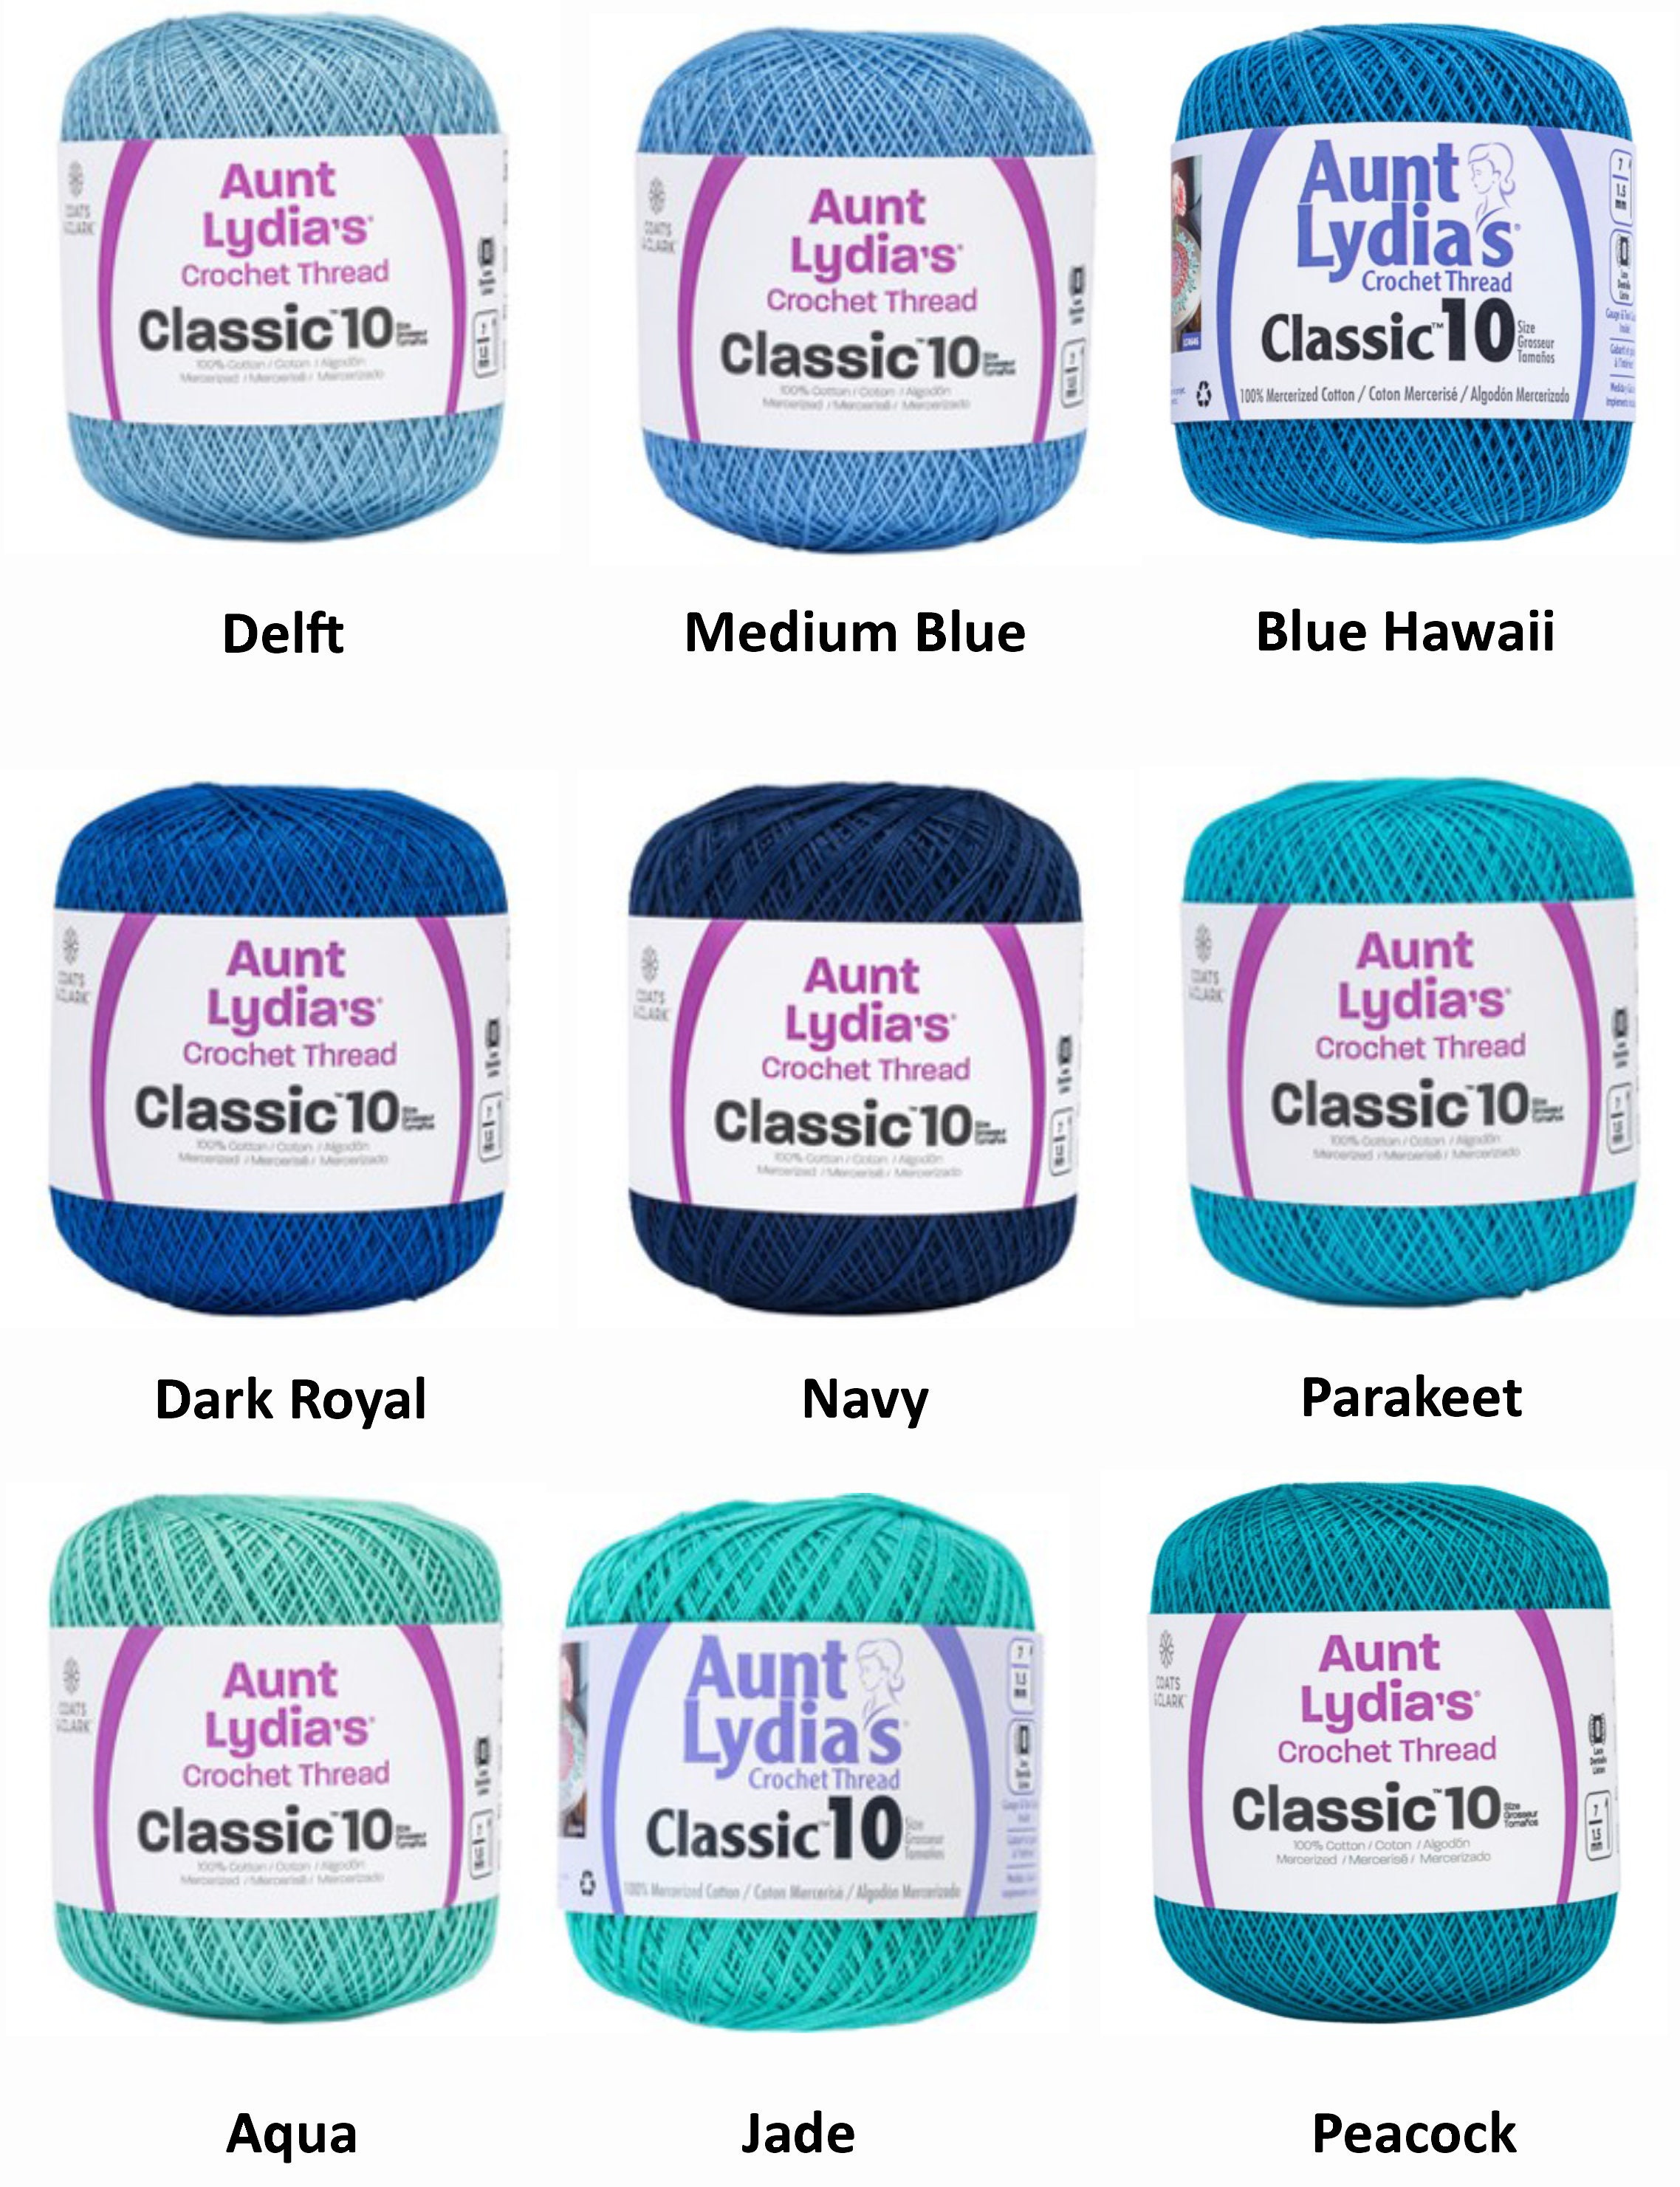 Aunt Lydia's Classic Crochet Thread Size 10-Navy, 1 count - Fry's